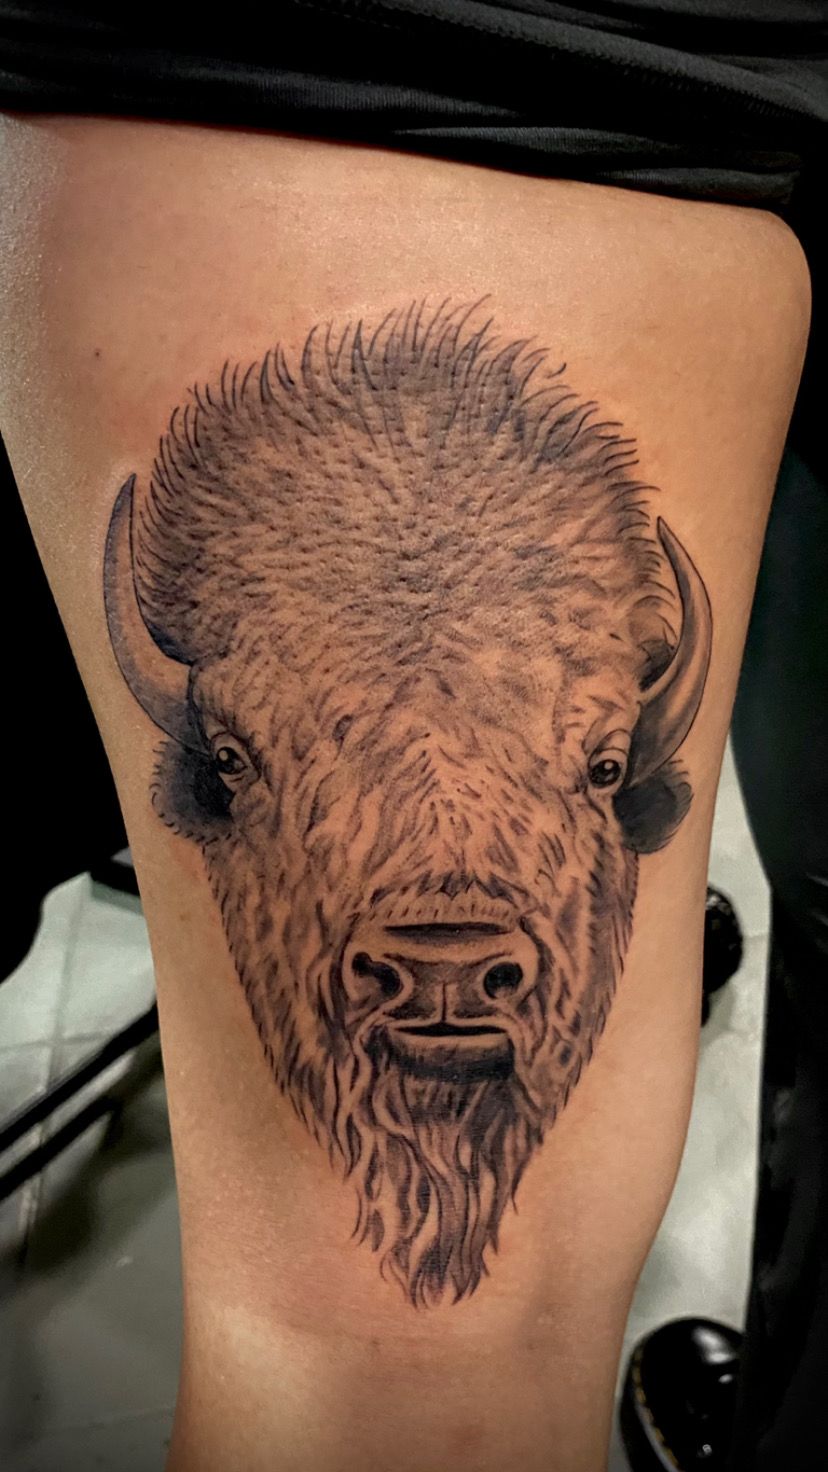 Entry #4 by Yoku02 for Bison Tattoo | Freelancer